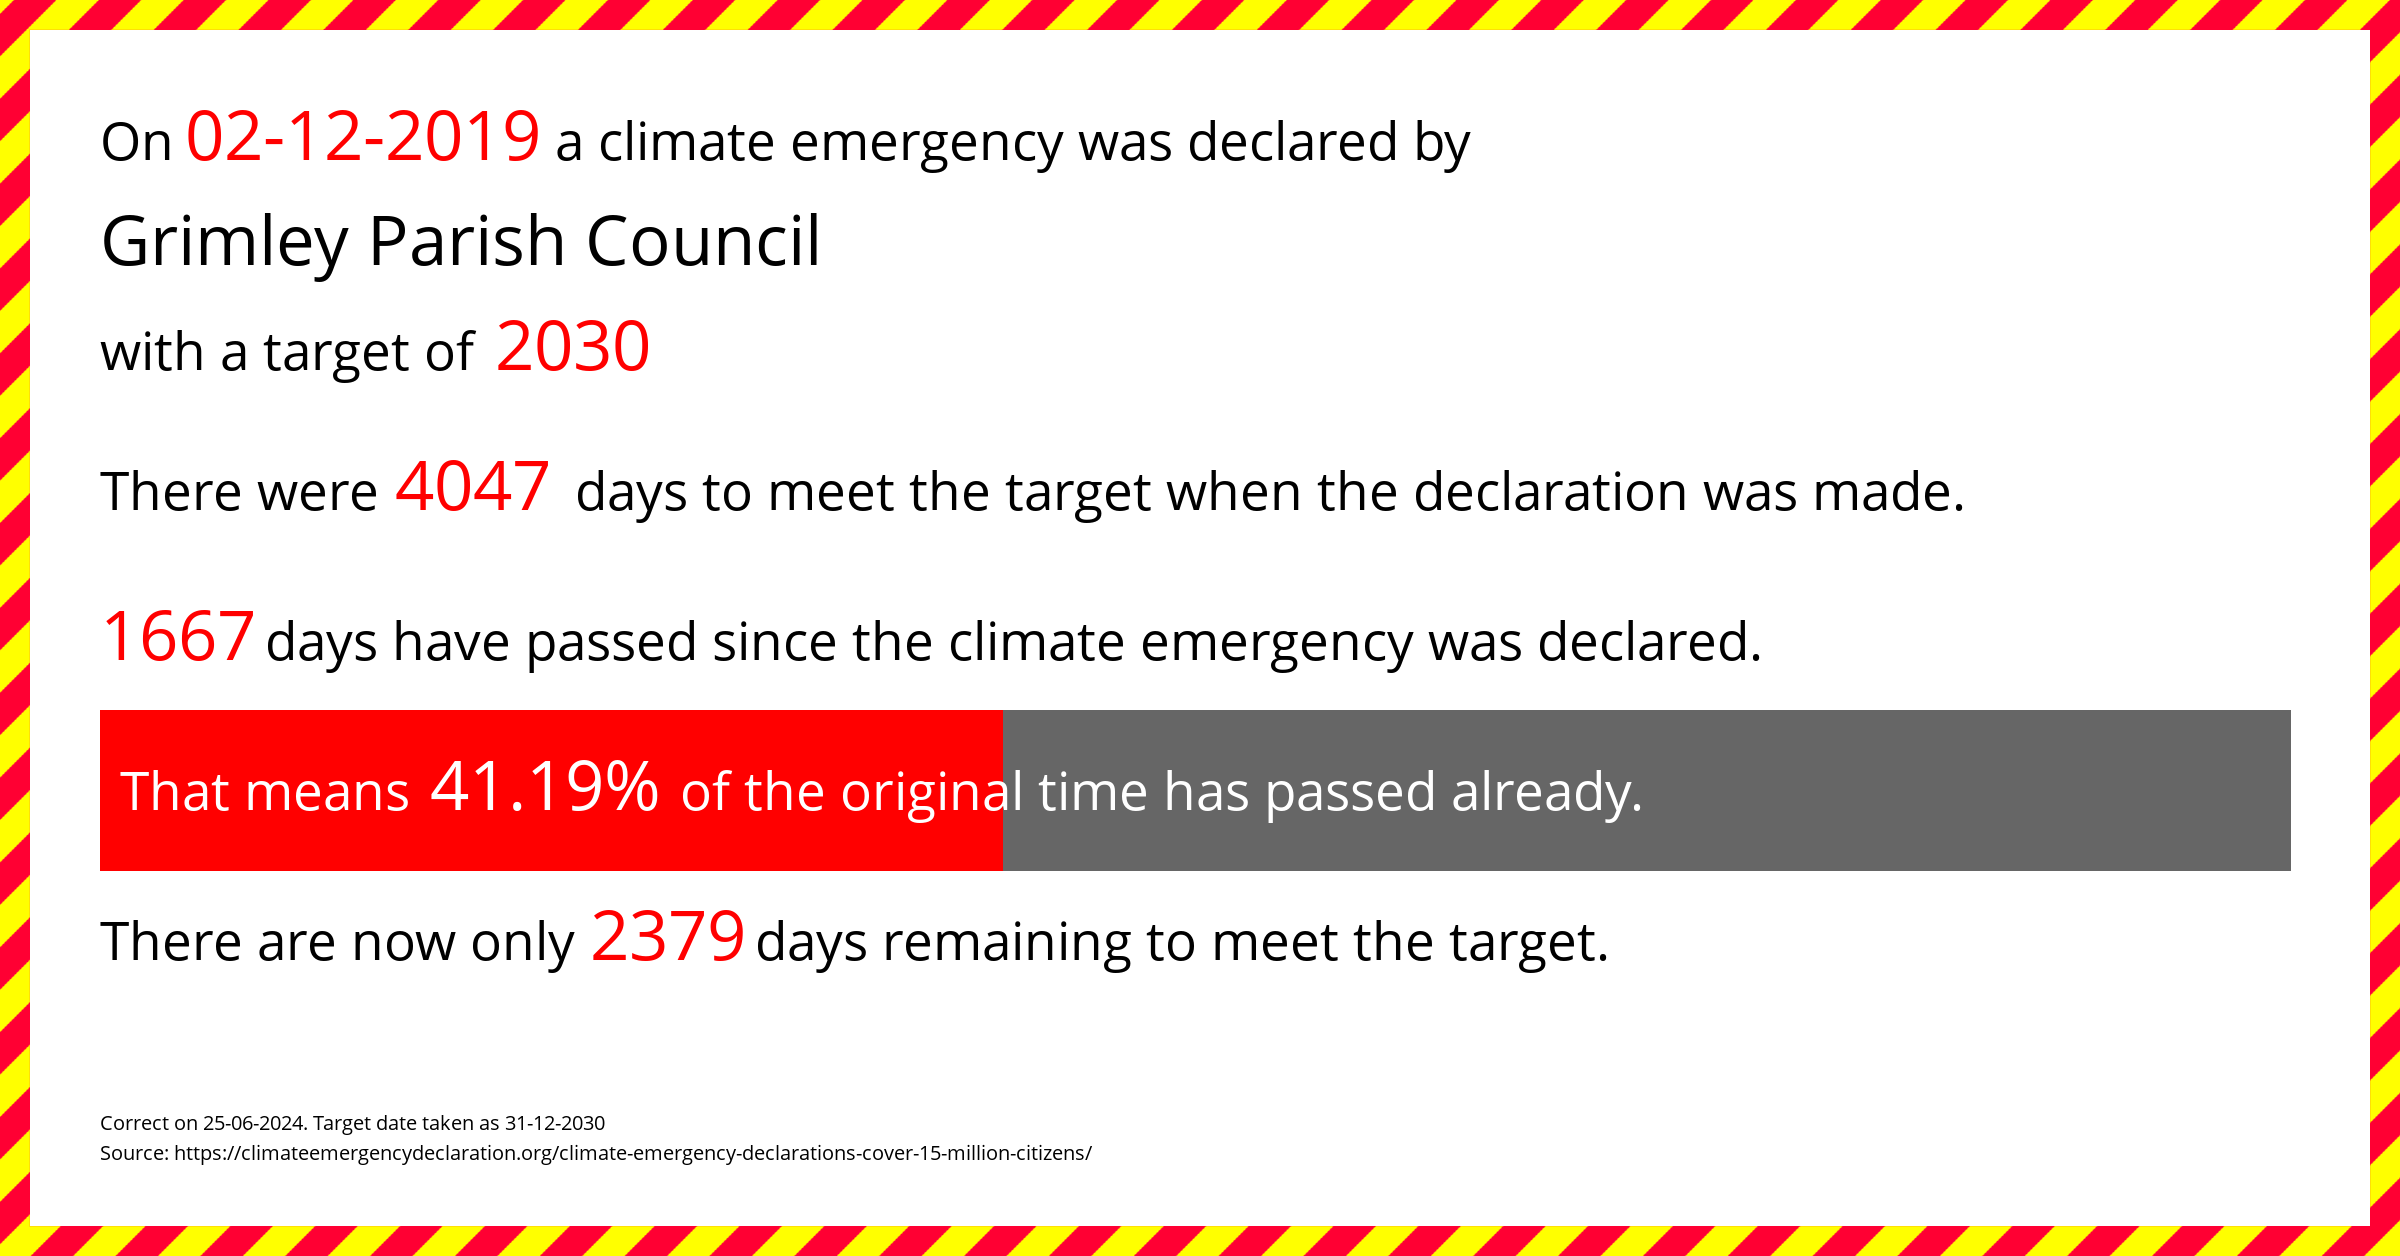 Grimley Parish Council declared a Climate emergency on Monday 2nd December 2019, with a target of 2030.